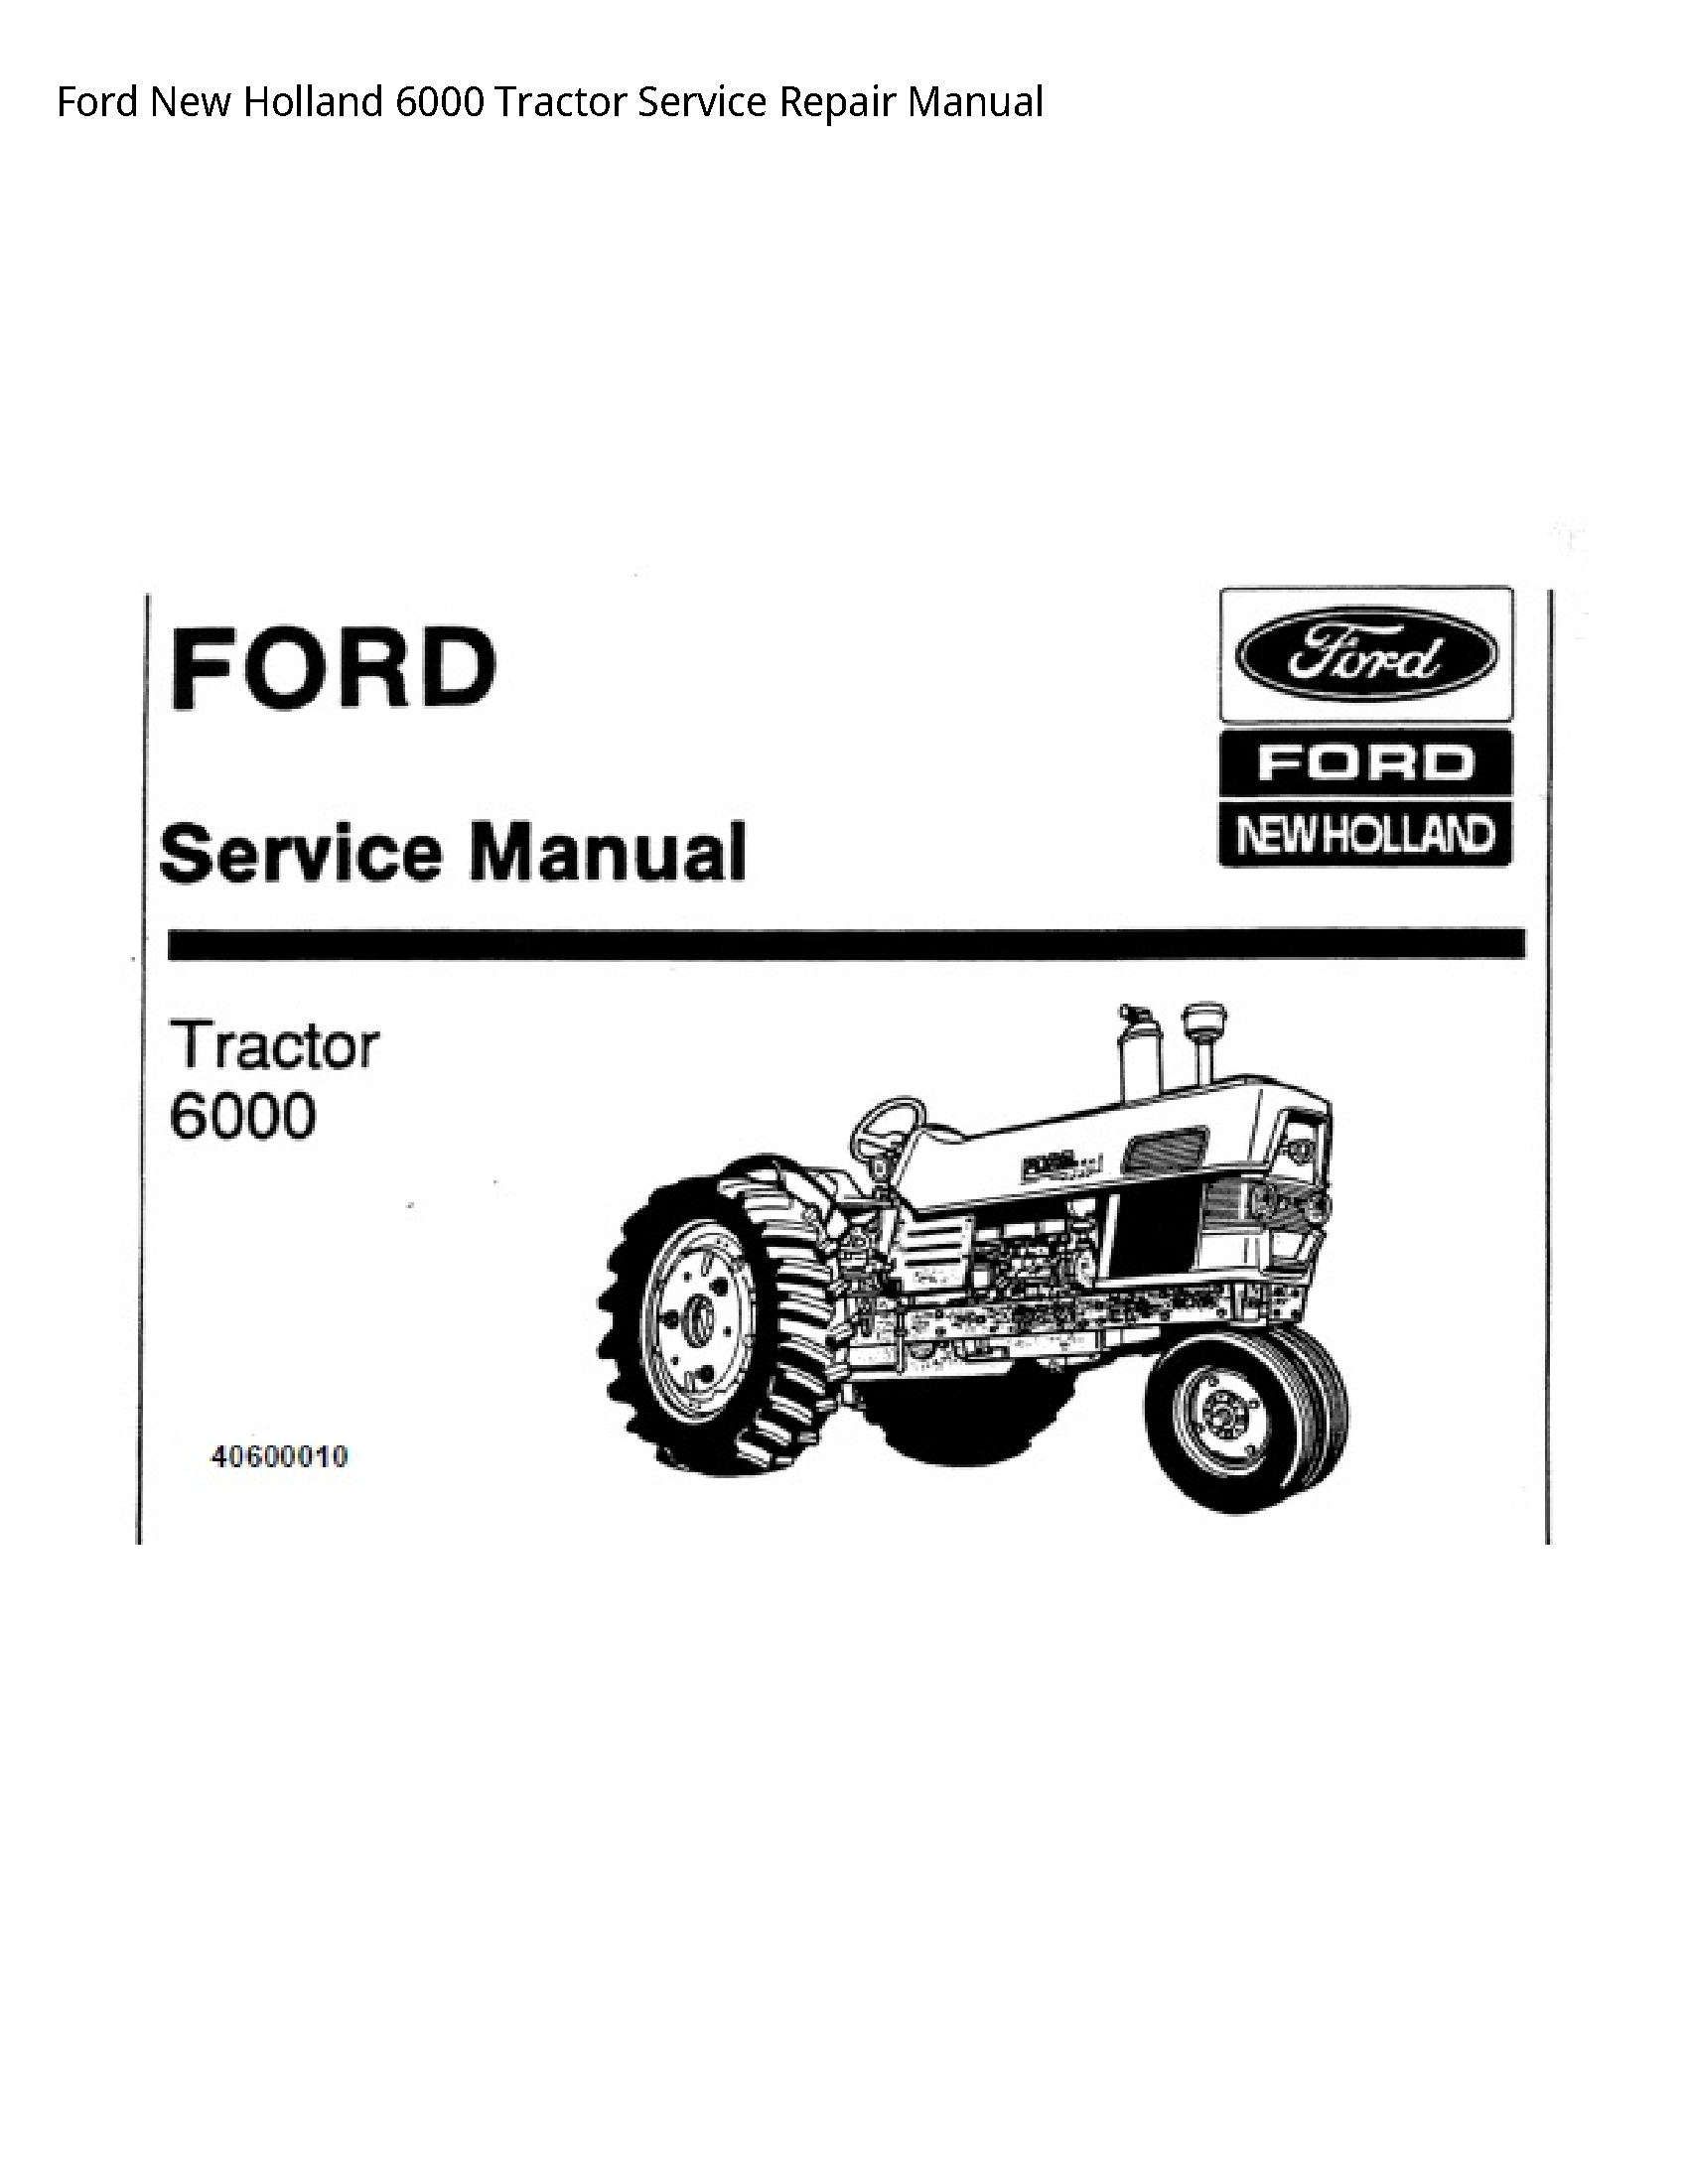  6000 Tractor manual